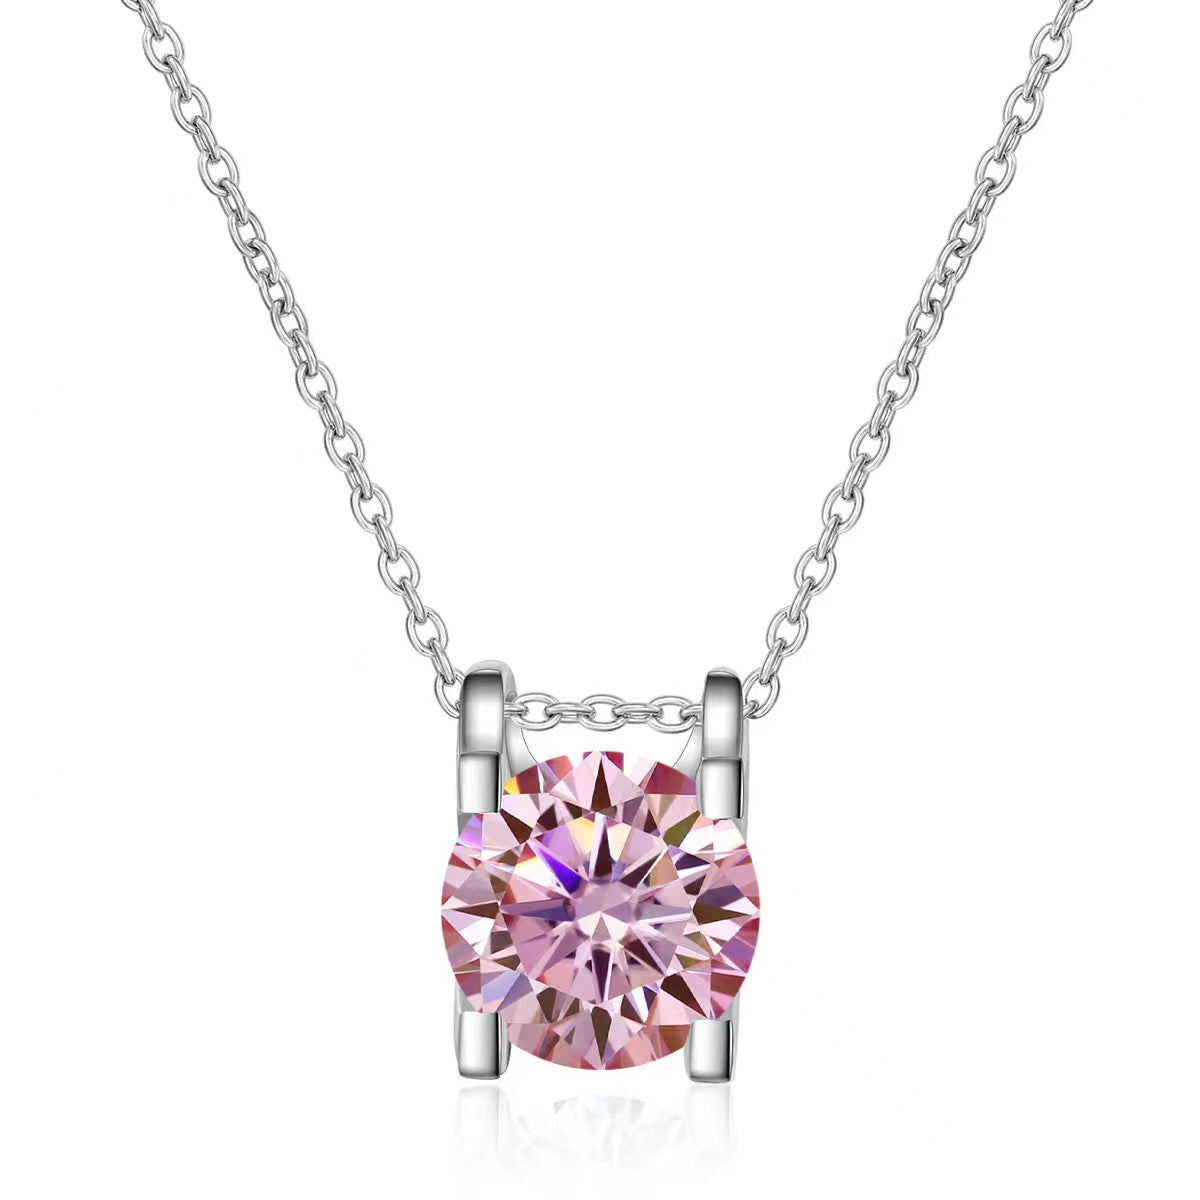 Pink Moissanite necklace for women